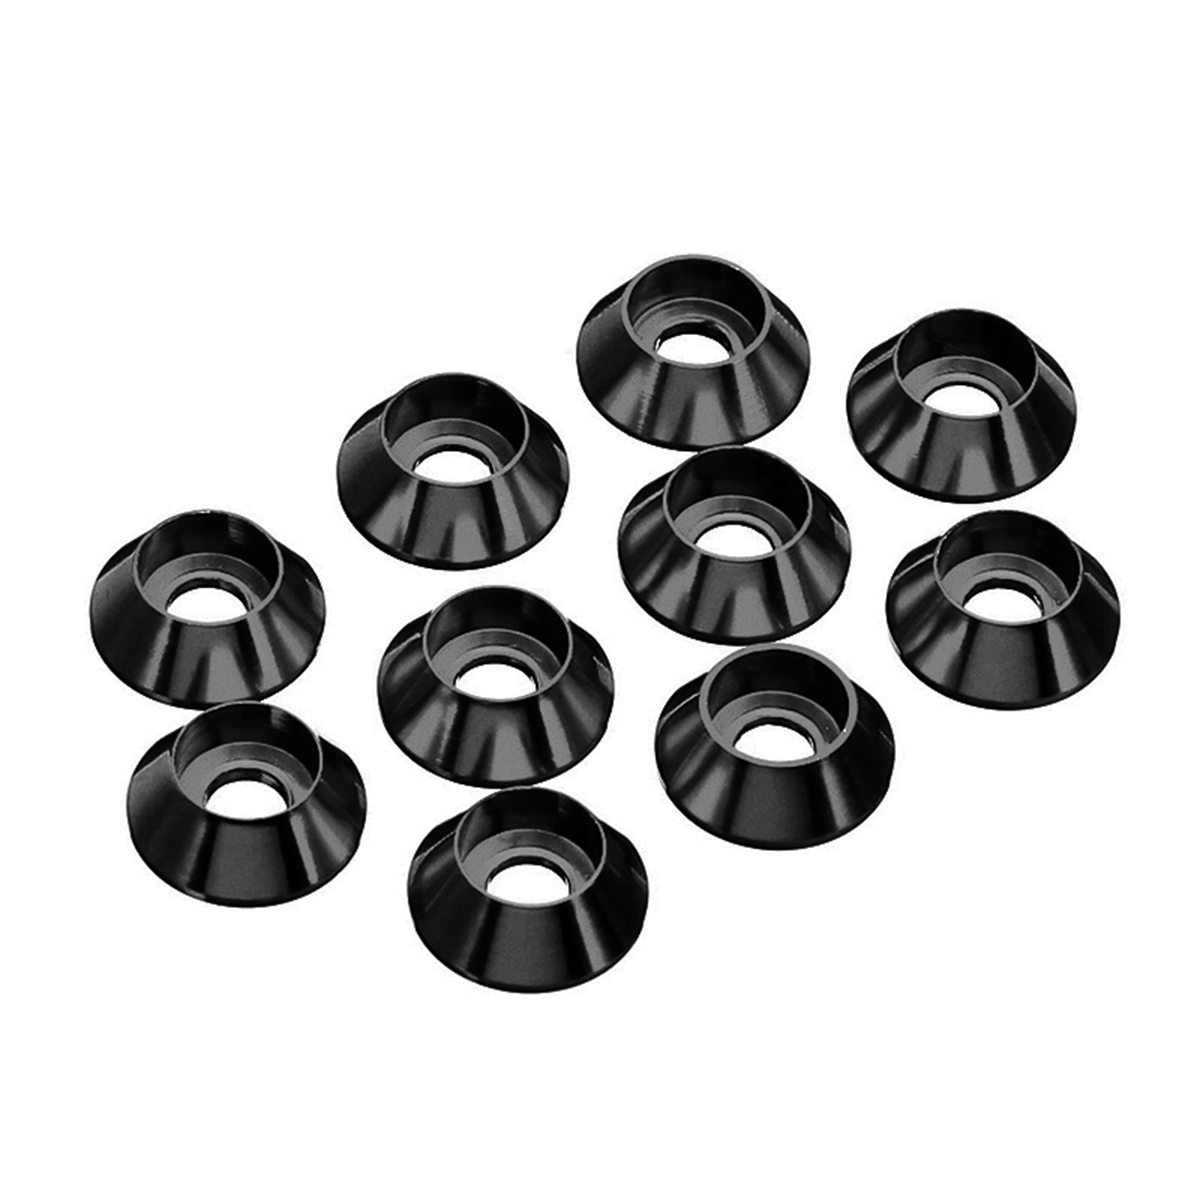 Sulevetrade-M5AN2-10Pcs-M5-Cup-Head-Hex-Screw-Gasket-Washer-Nuts-Aluminum-Alloy-Multicolor-1535744-5